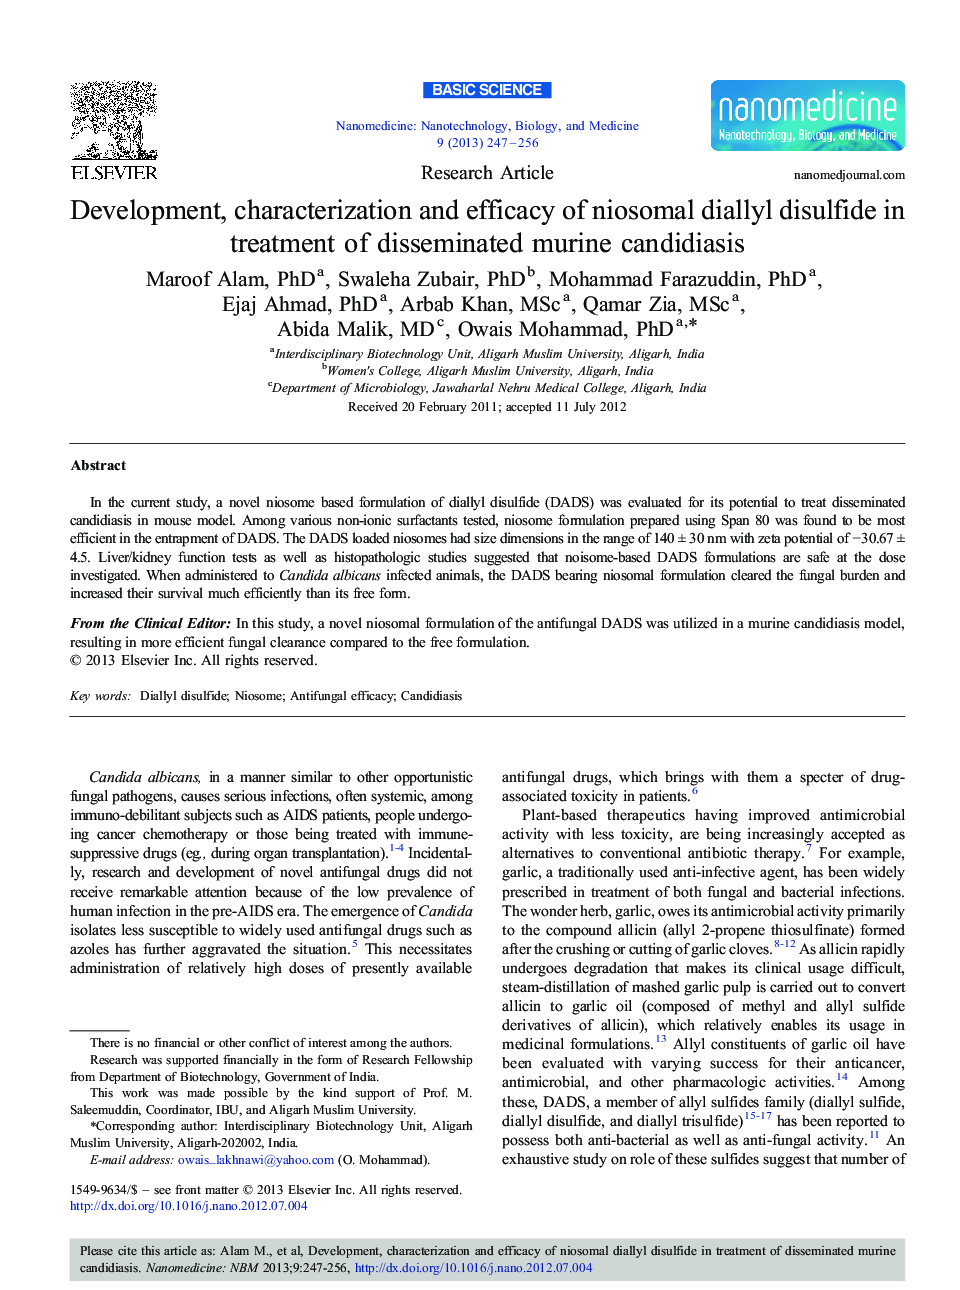 Development, characterization and efficacy of niosomal diallyl disulfide in treatment of disseminated murine candidiasis 